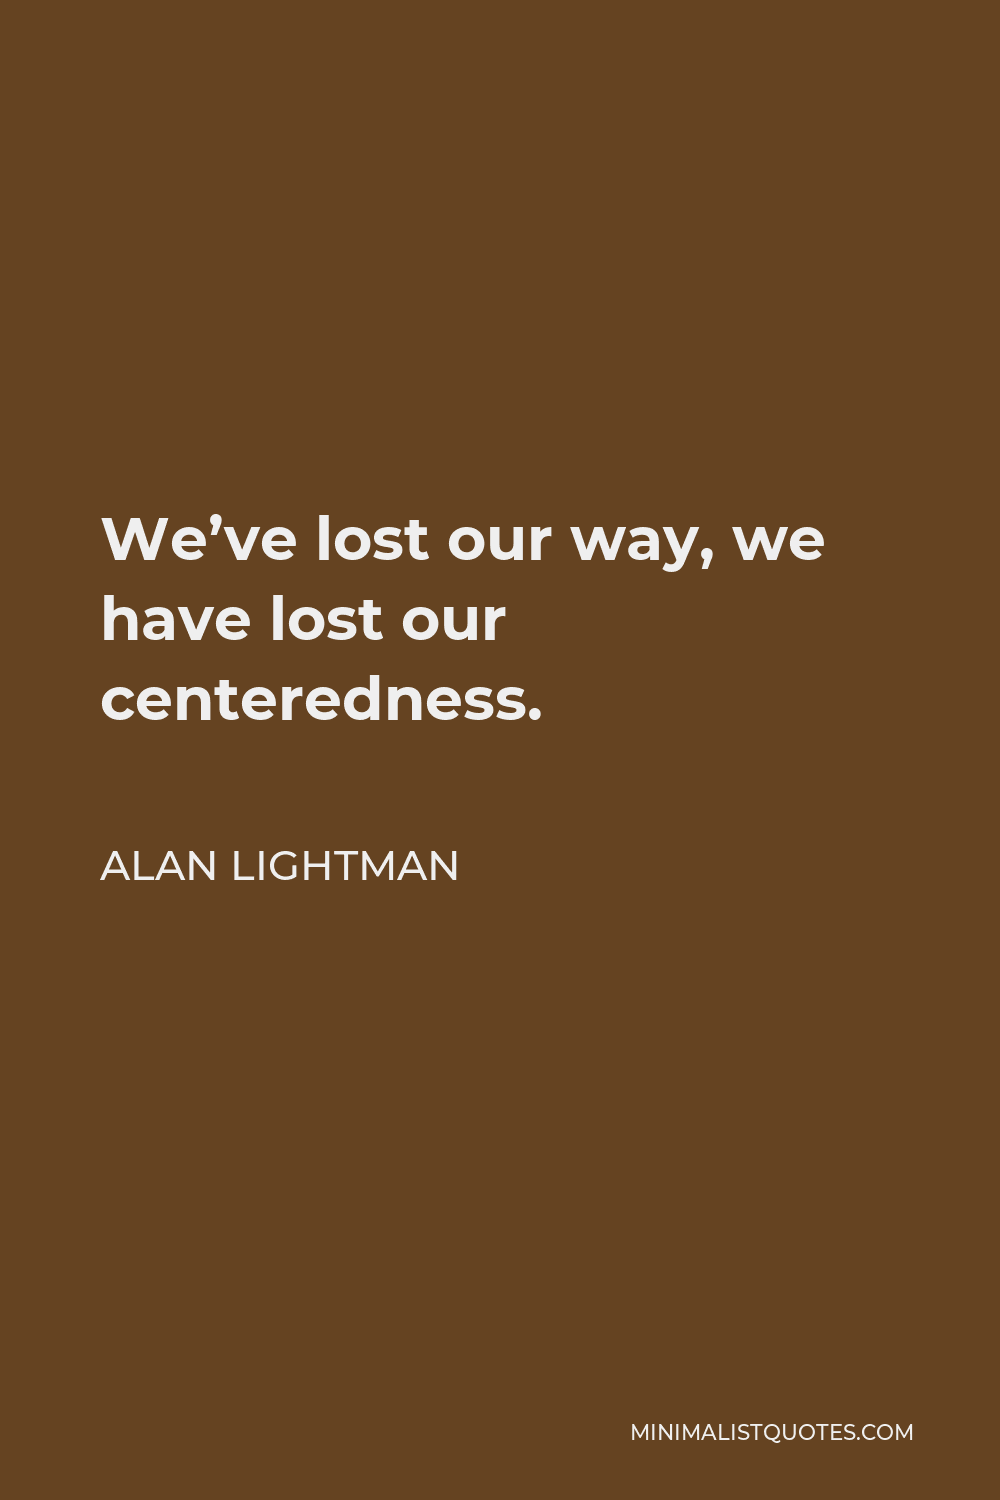 Alan Lightman Quote - We’ve lost our way, we have lost our centeredness.